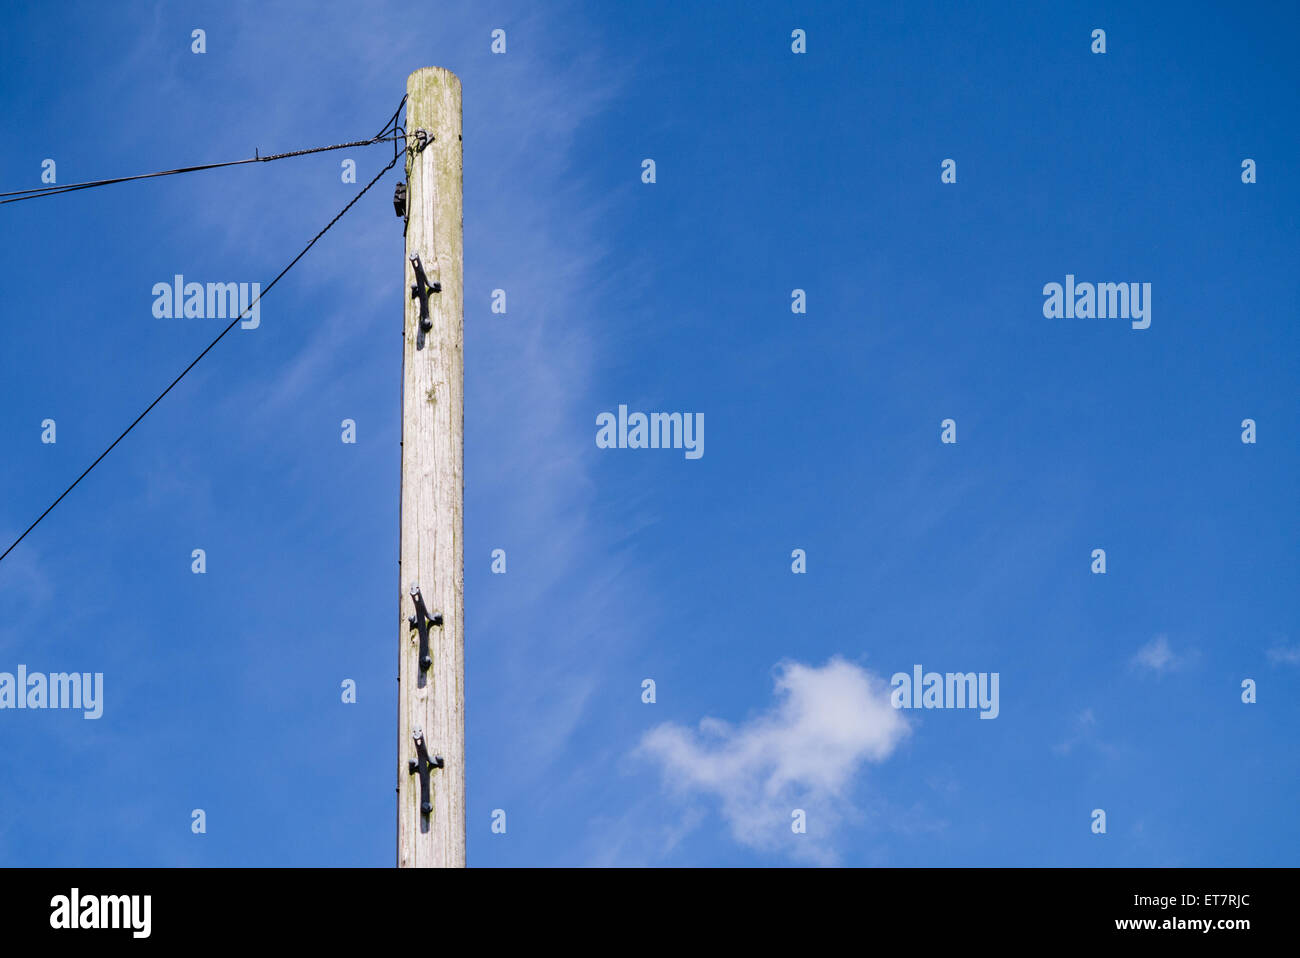 Wooden telegraph pole against a bright blue sky with copyspace Stock Photo